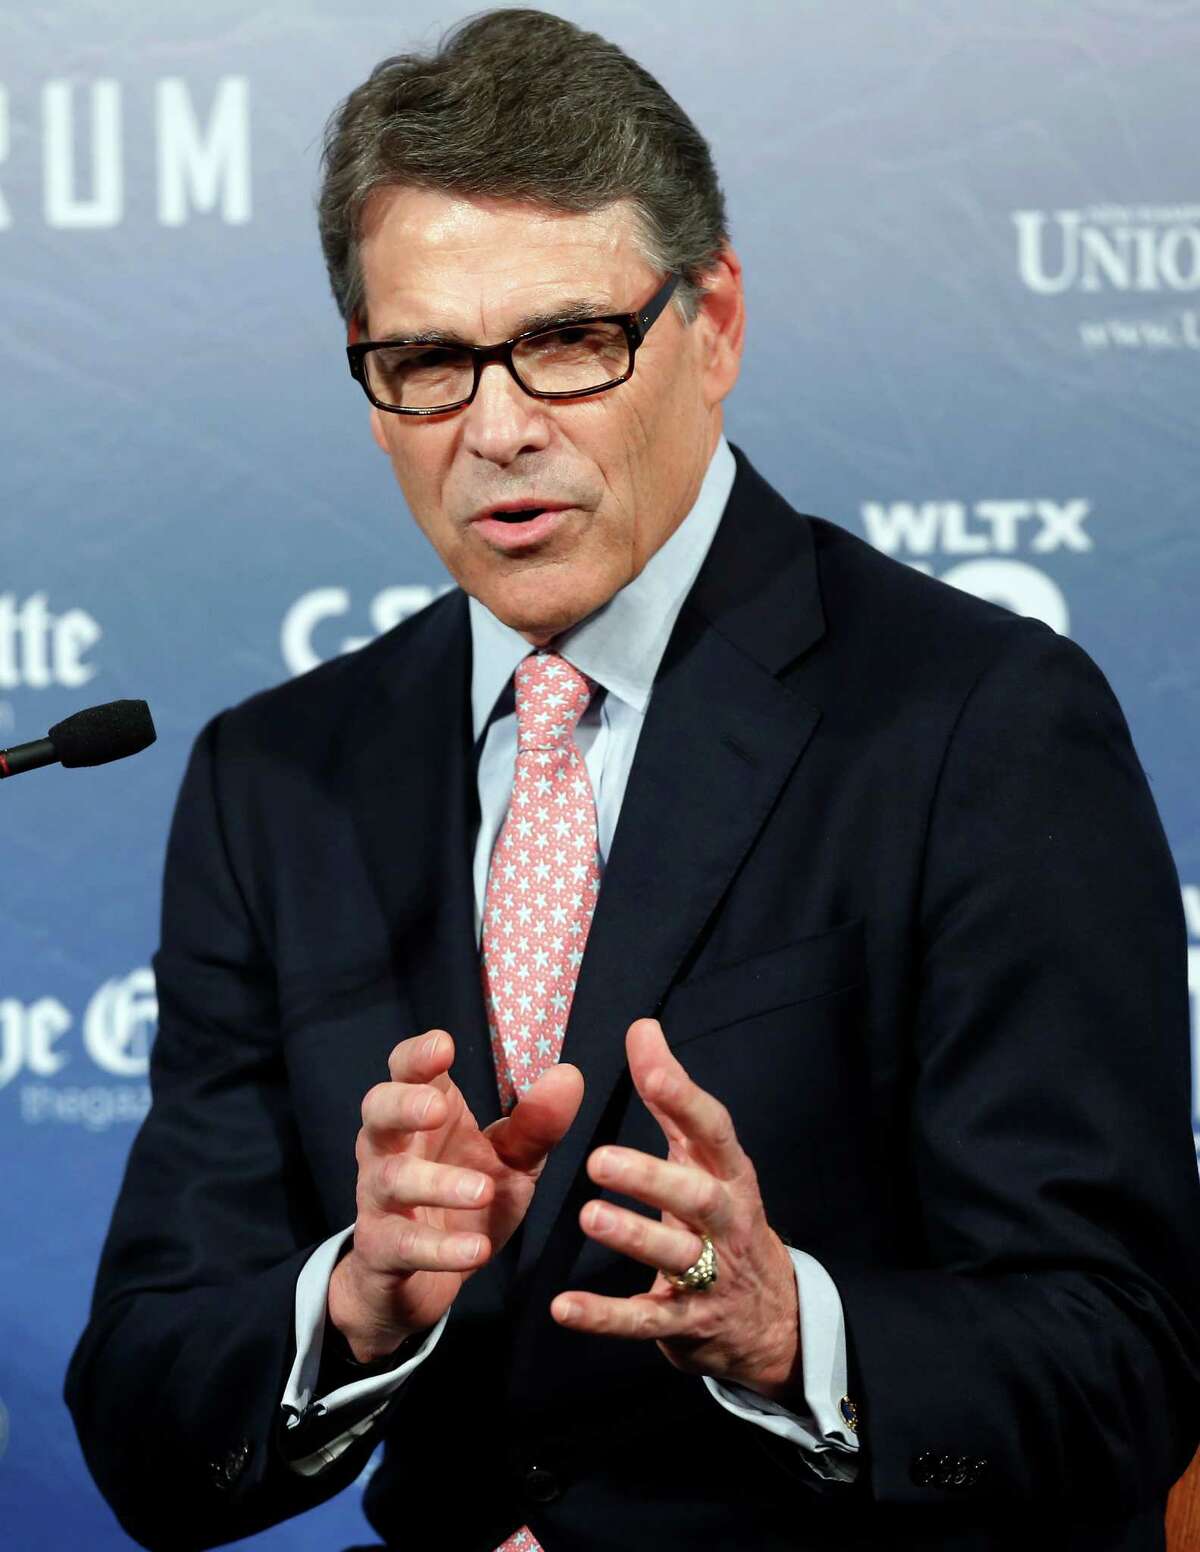 There was one other reason we don't like to talk about Rick Perry but we forgot what it is. Oops! 